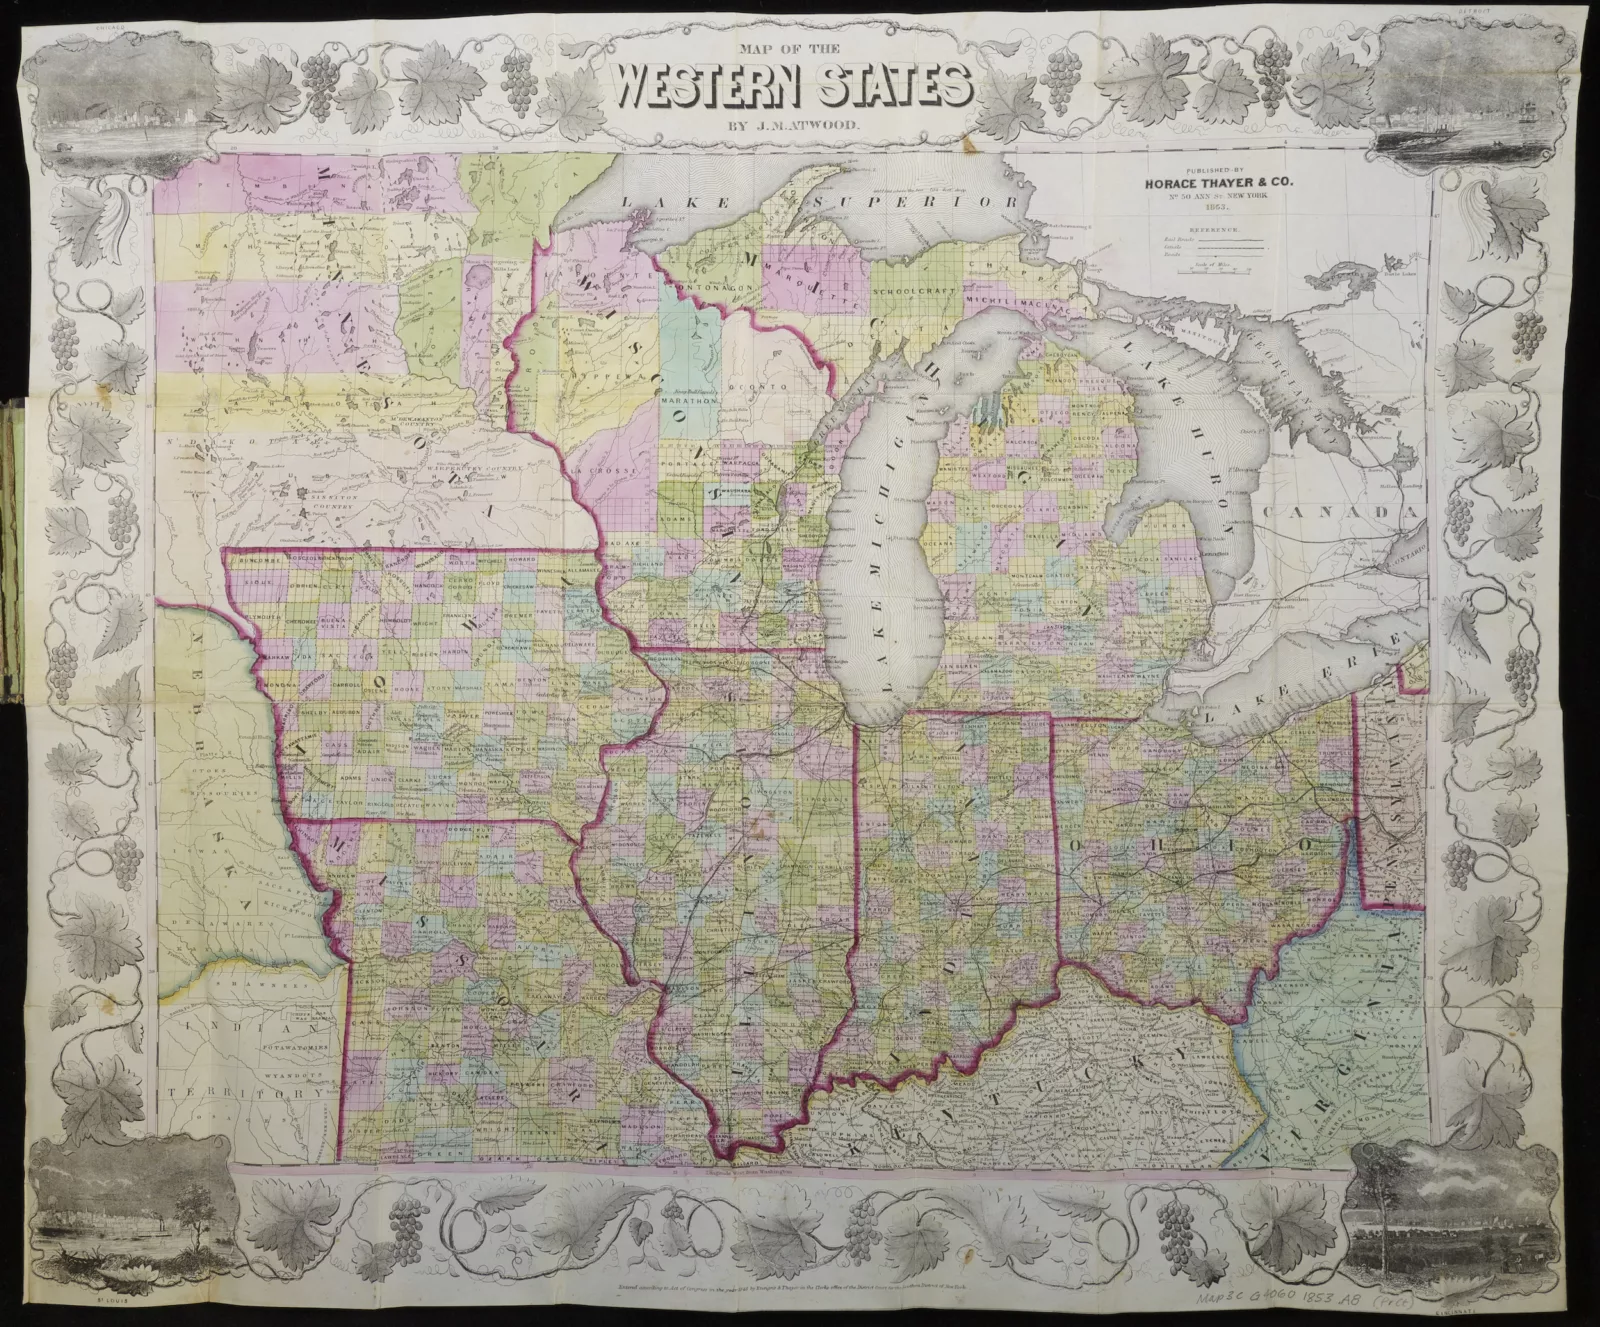 "Map of the Western States." John M. Atwood, 1853